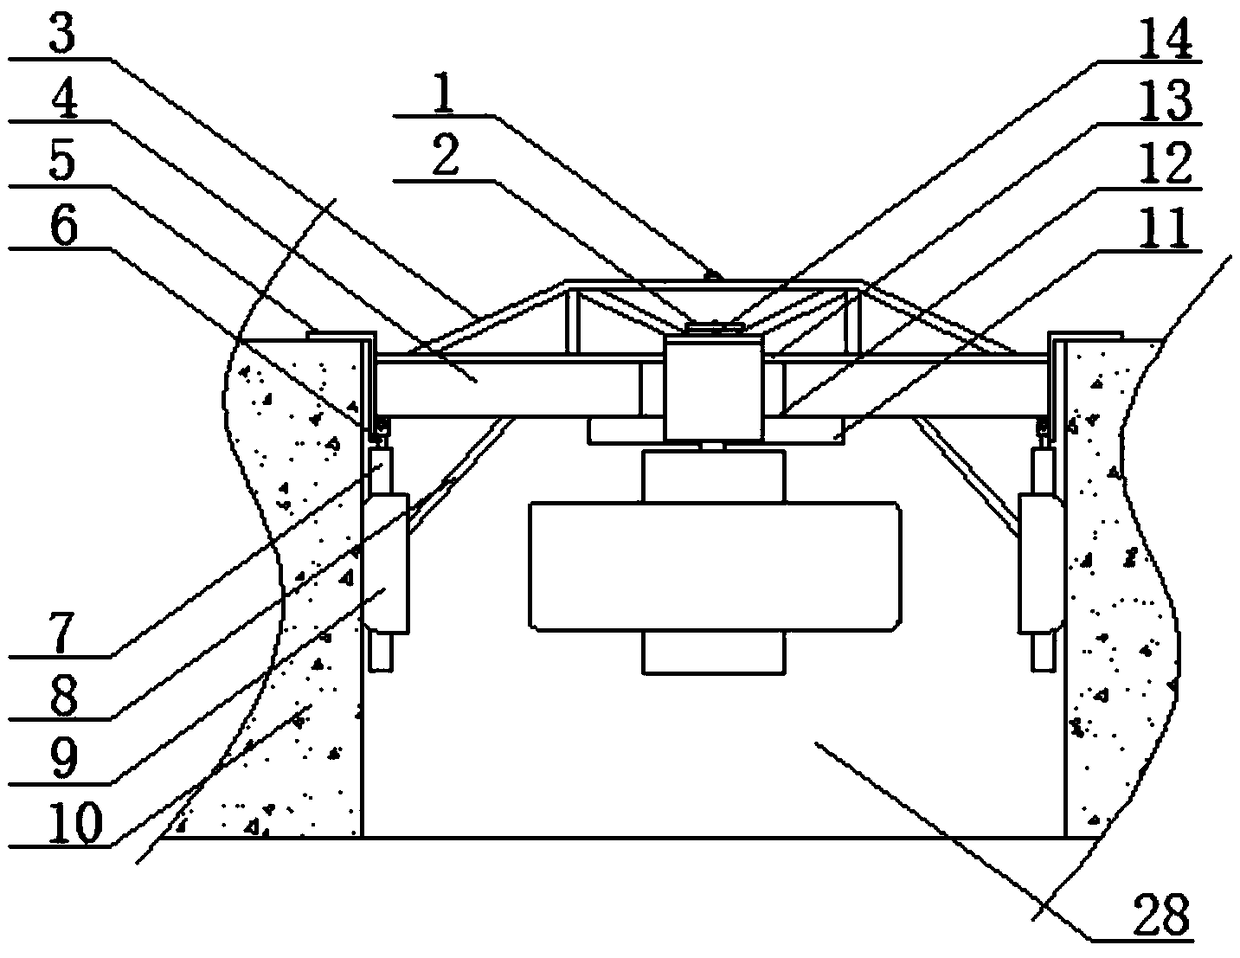 Support frame used for foundation pit with arch type balanced beam structure